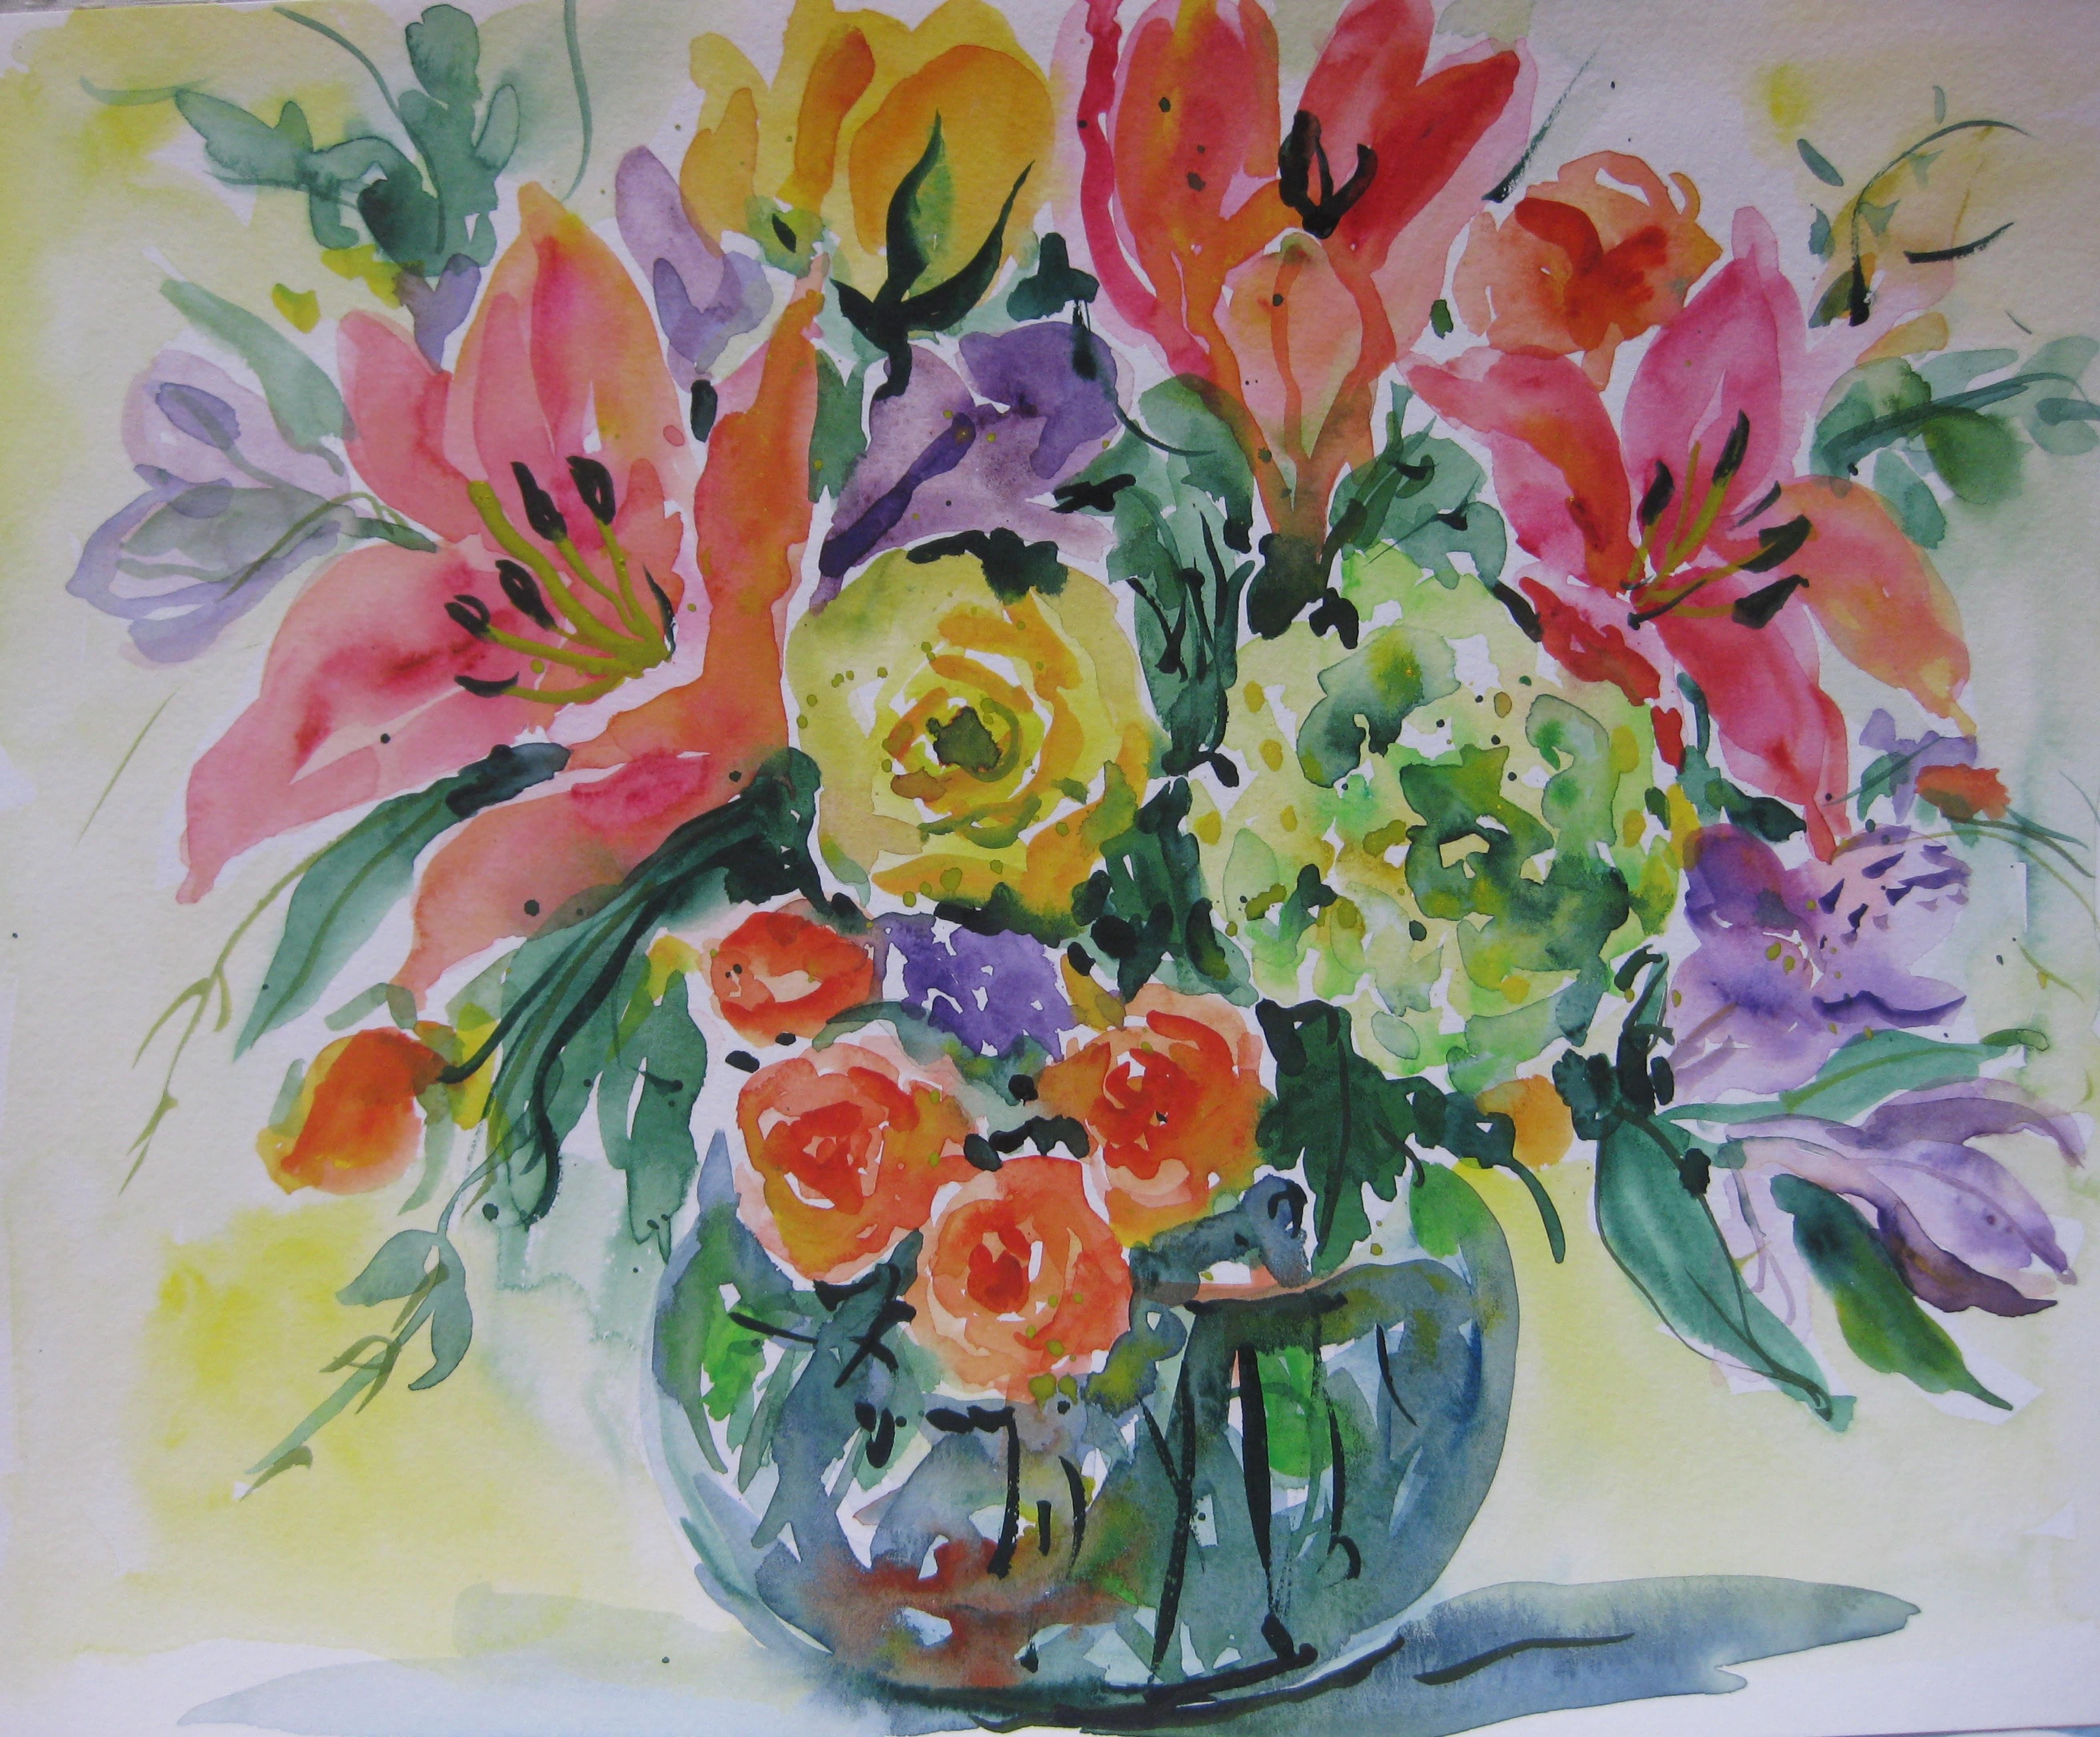 Ingrid Dohm Still-Life - Red Lilies, Original Watercolor Painting, 2014